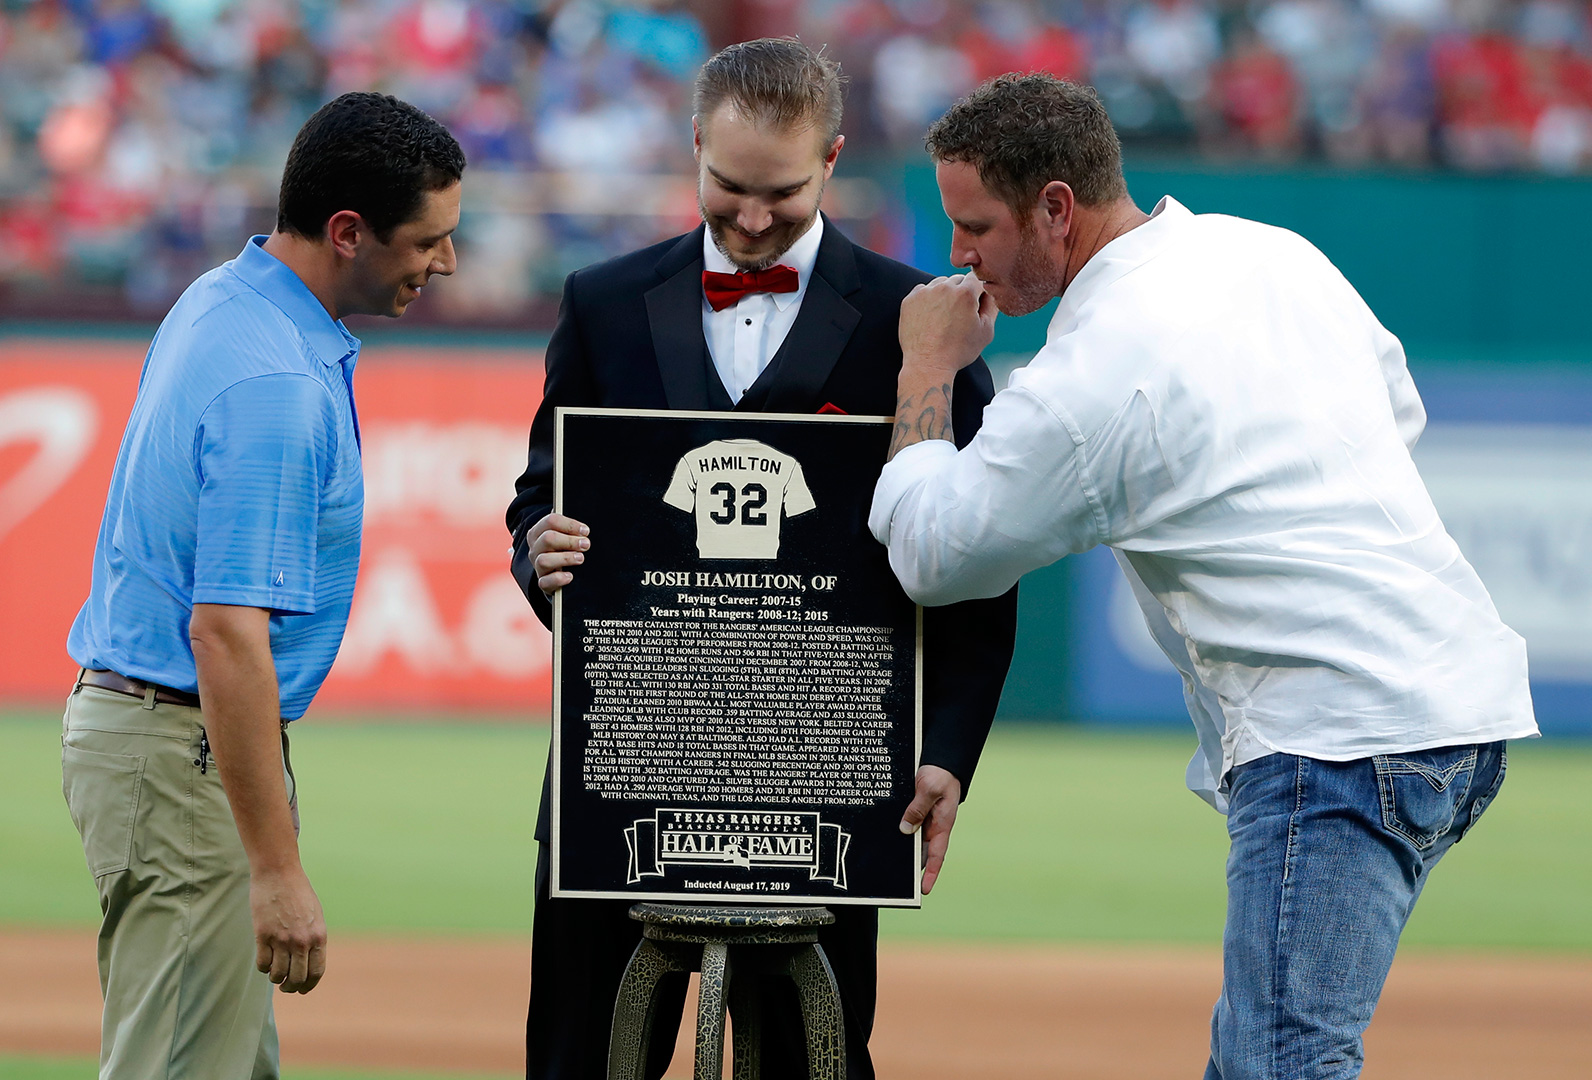 Josh Hamilton's enshrinement in Rangers Hall of Fame was a time of